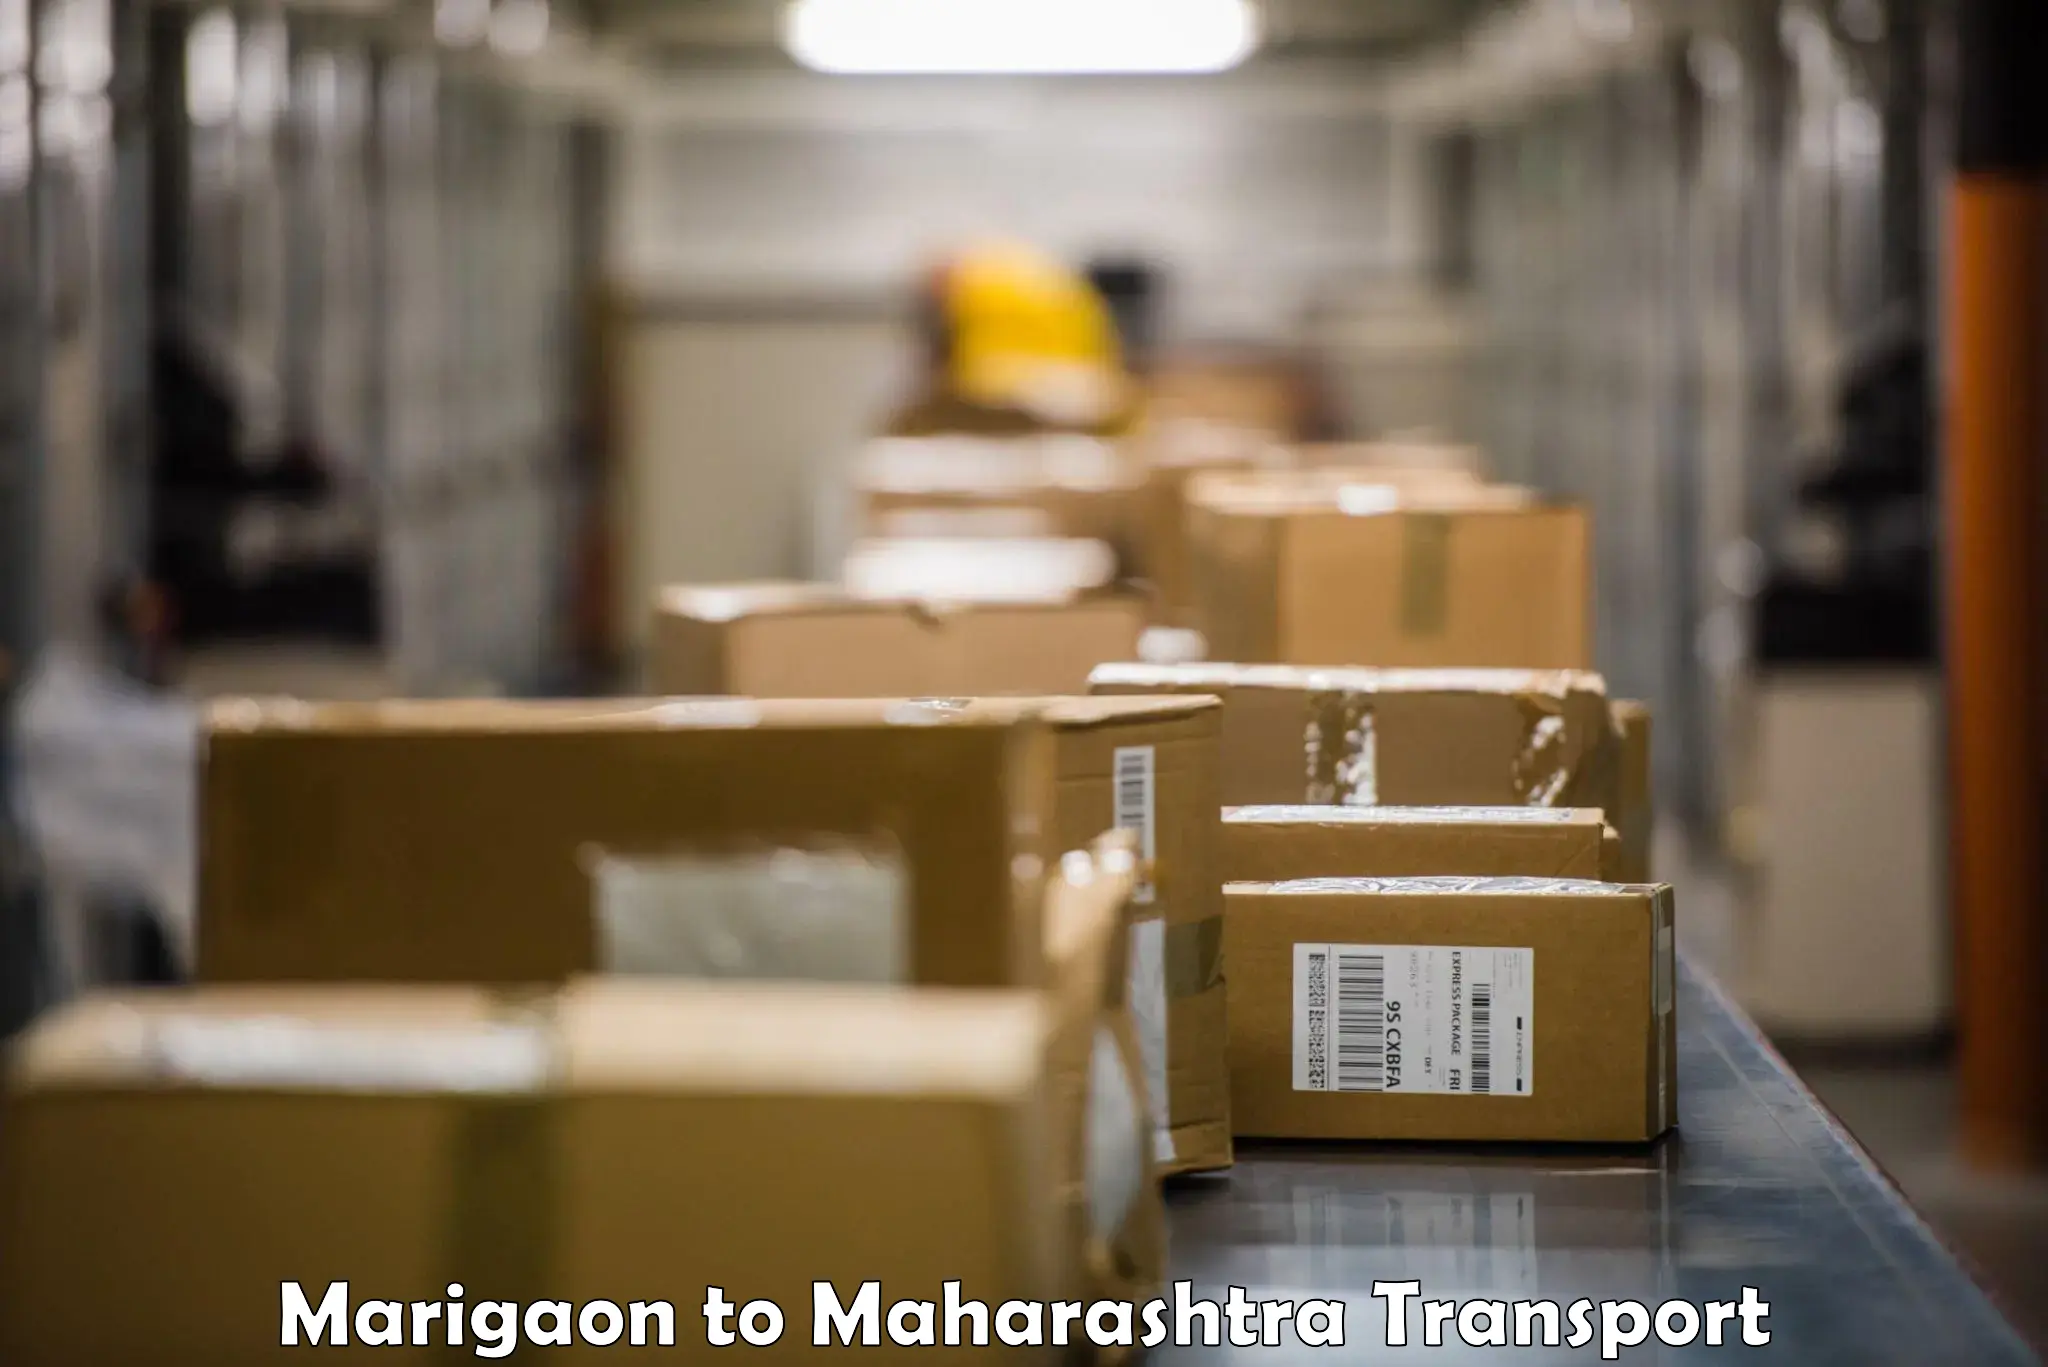 Transport bike from one state to another Marigaon to Gadchiroli